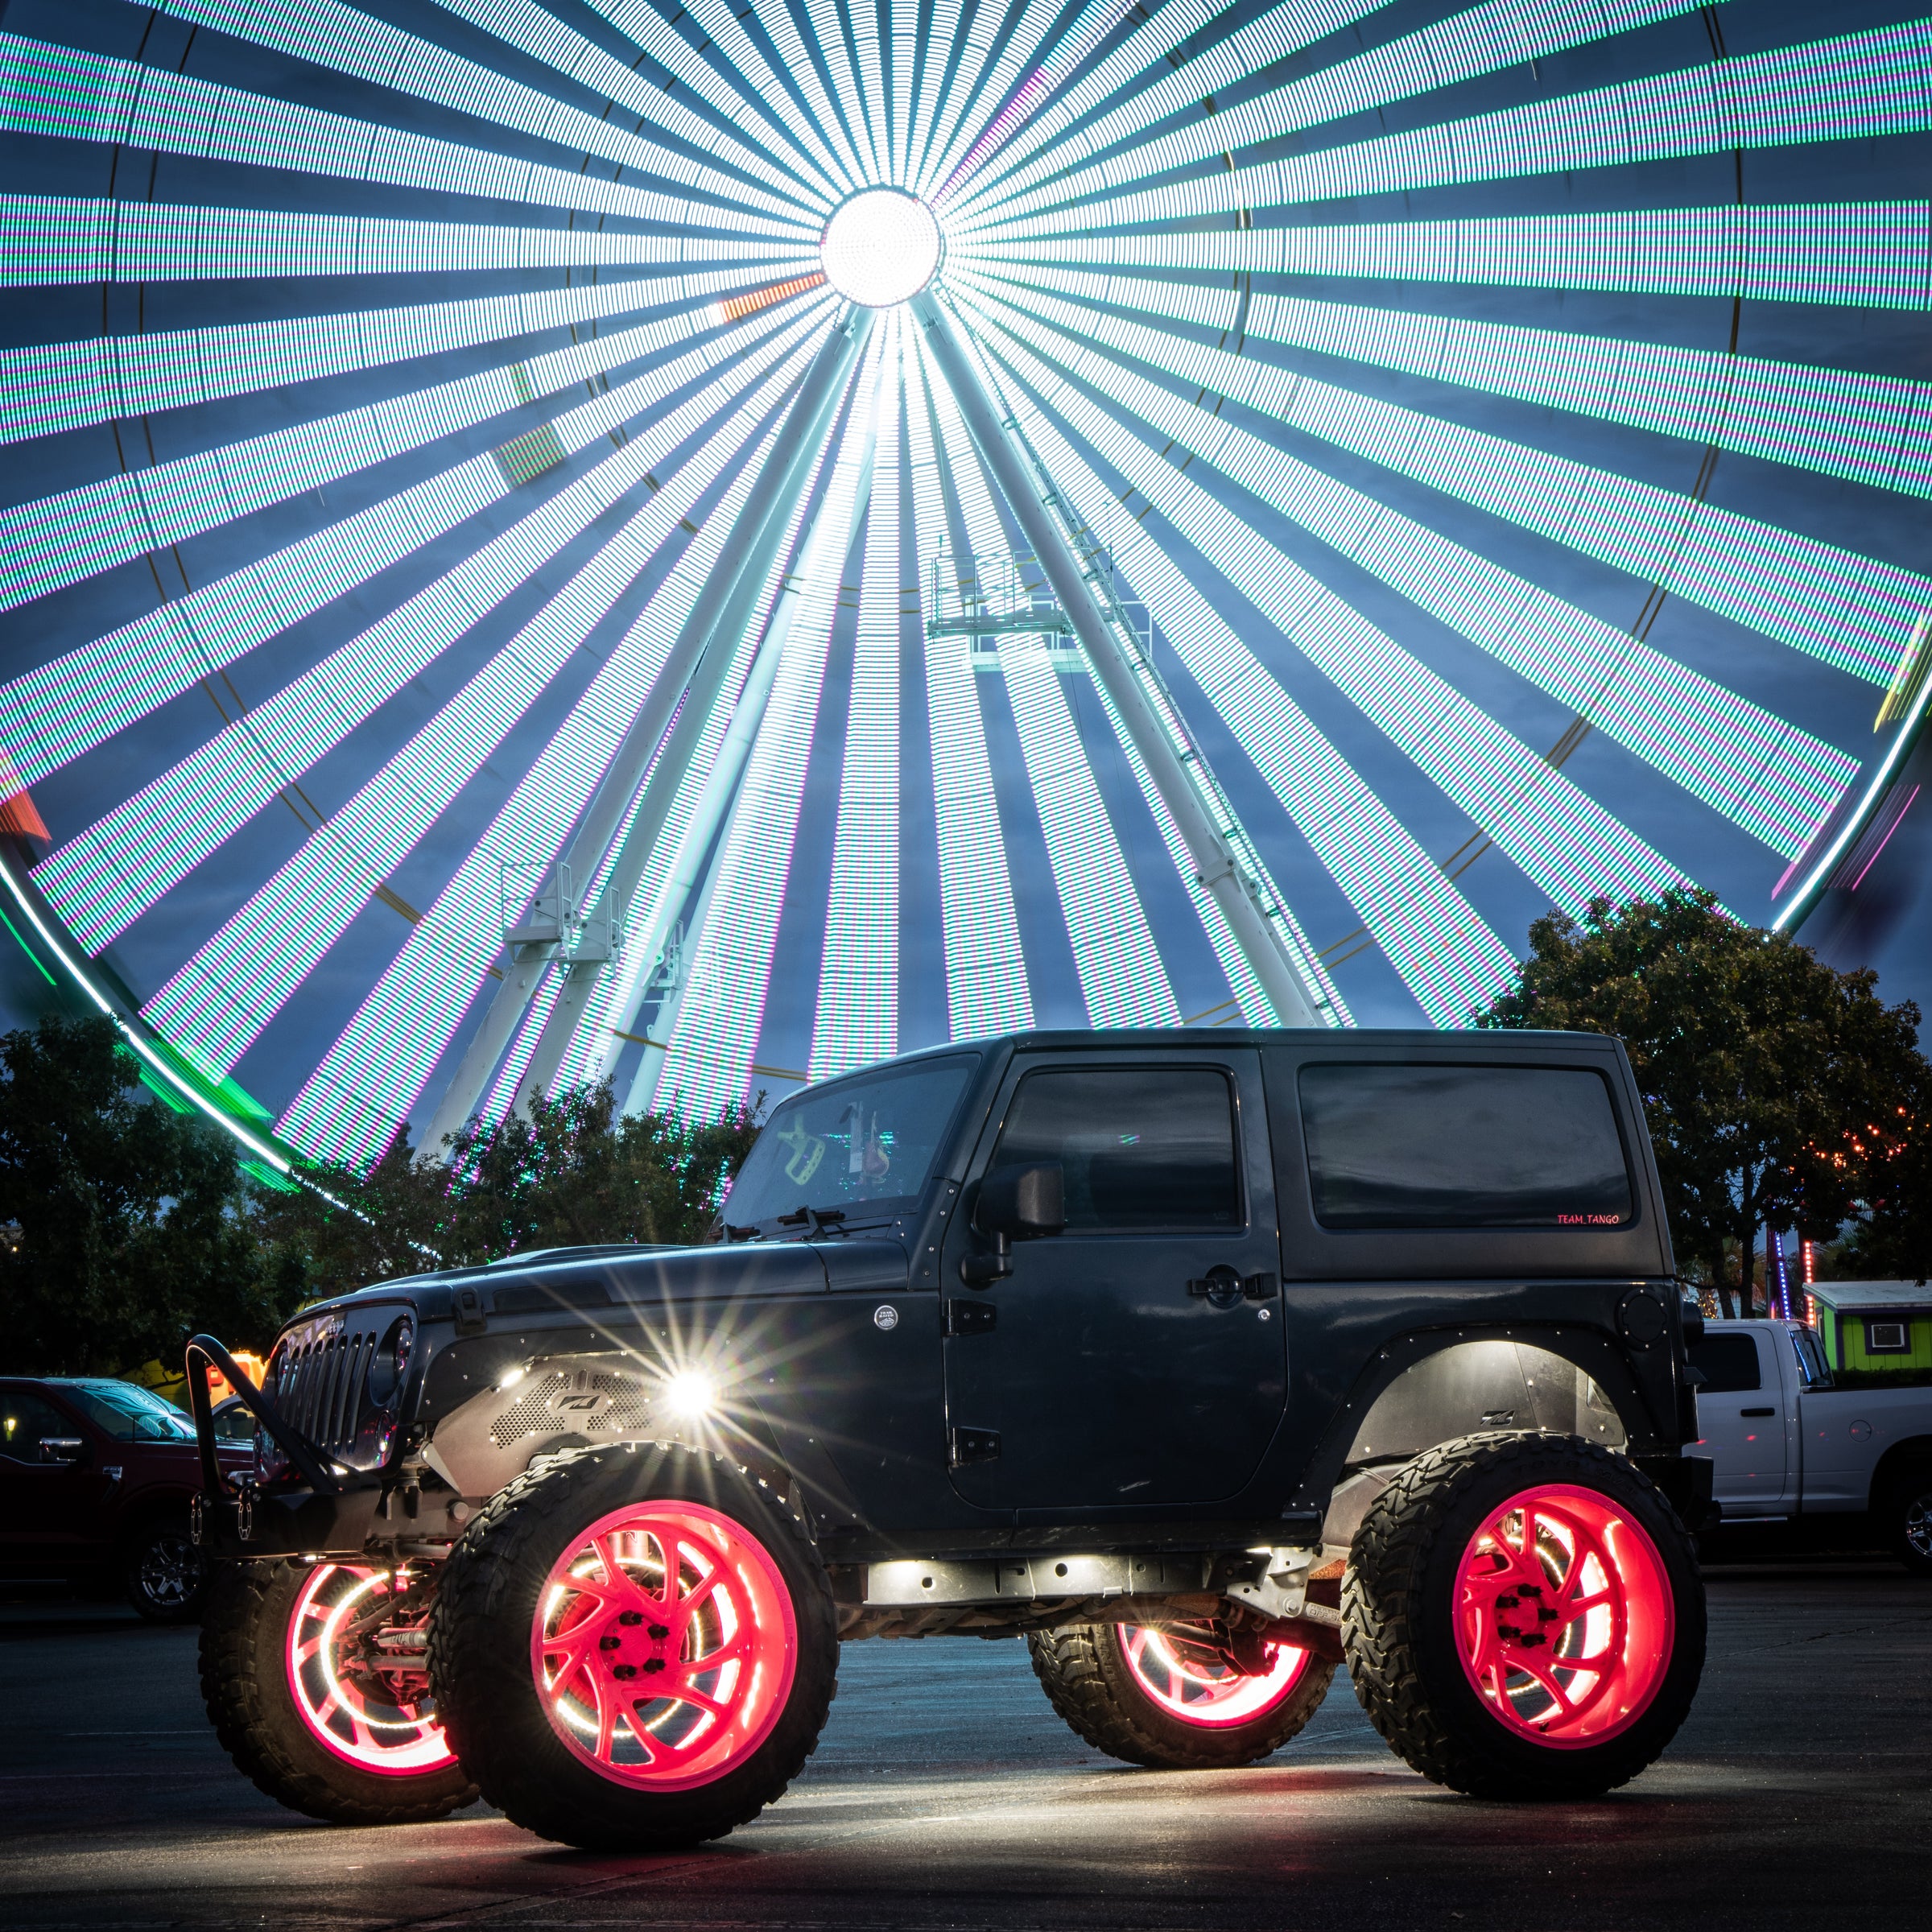 Jeep Rock Lights, Wheel lights and LED Whips